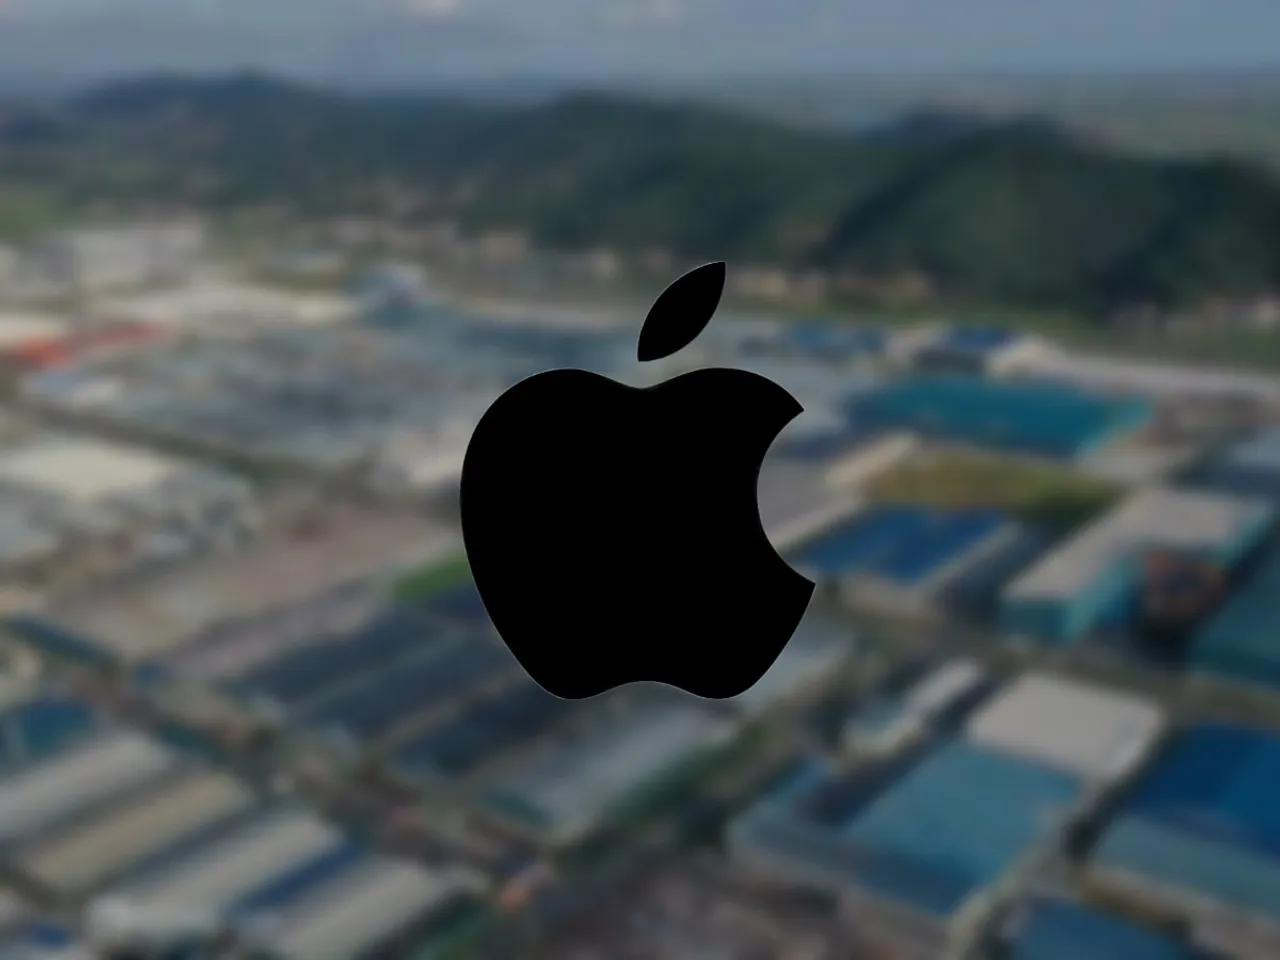 Apple’s Expansion of Manufacturing to Vietnam Aims to Reduce Risks and Fuel Growth